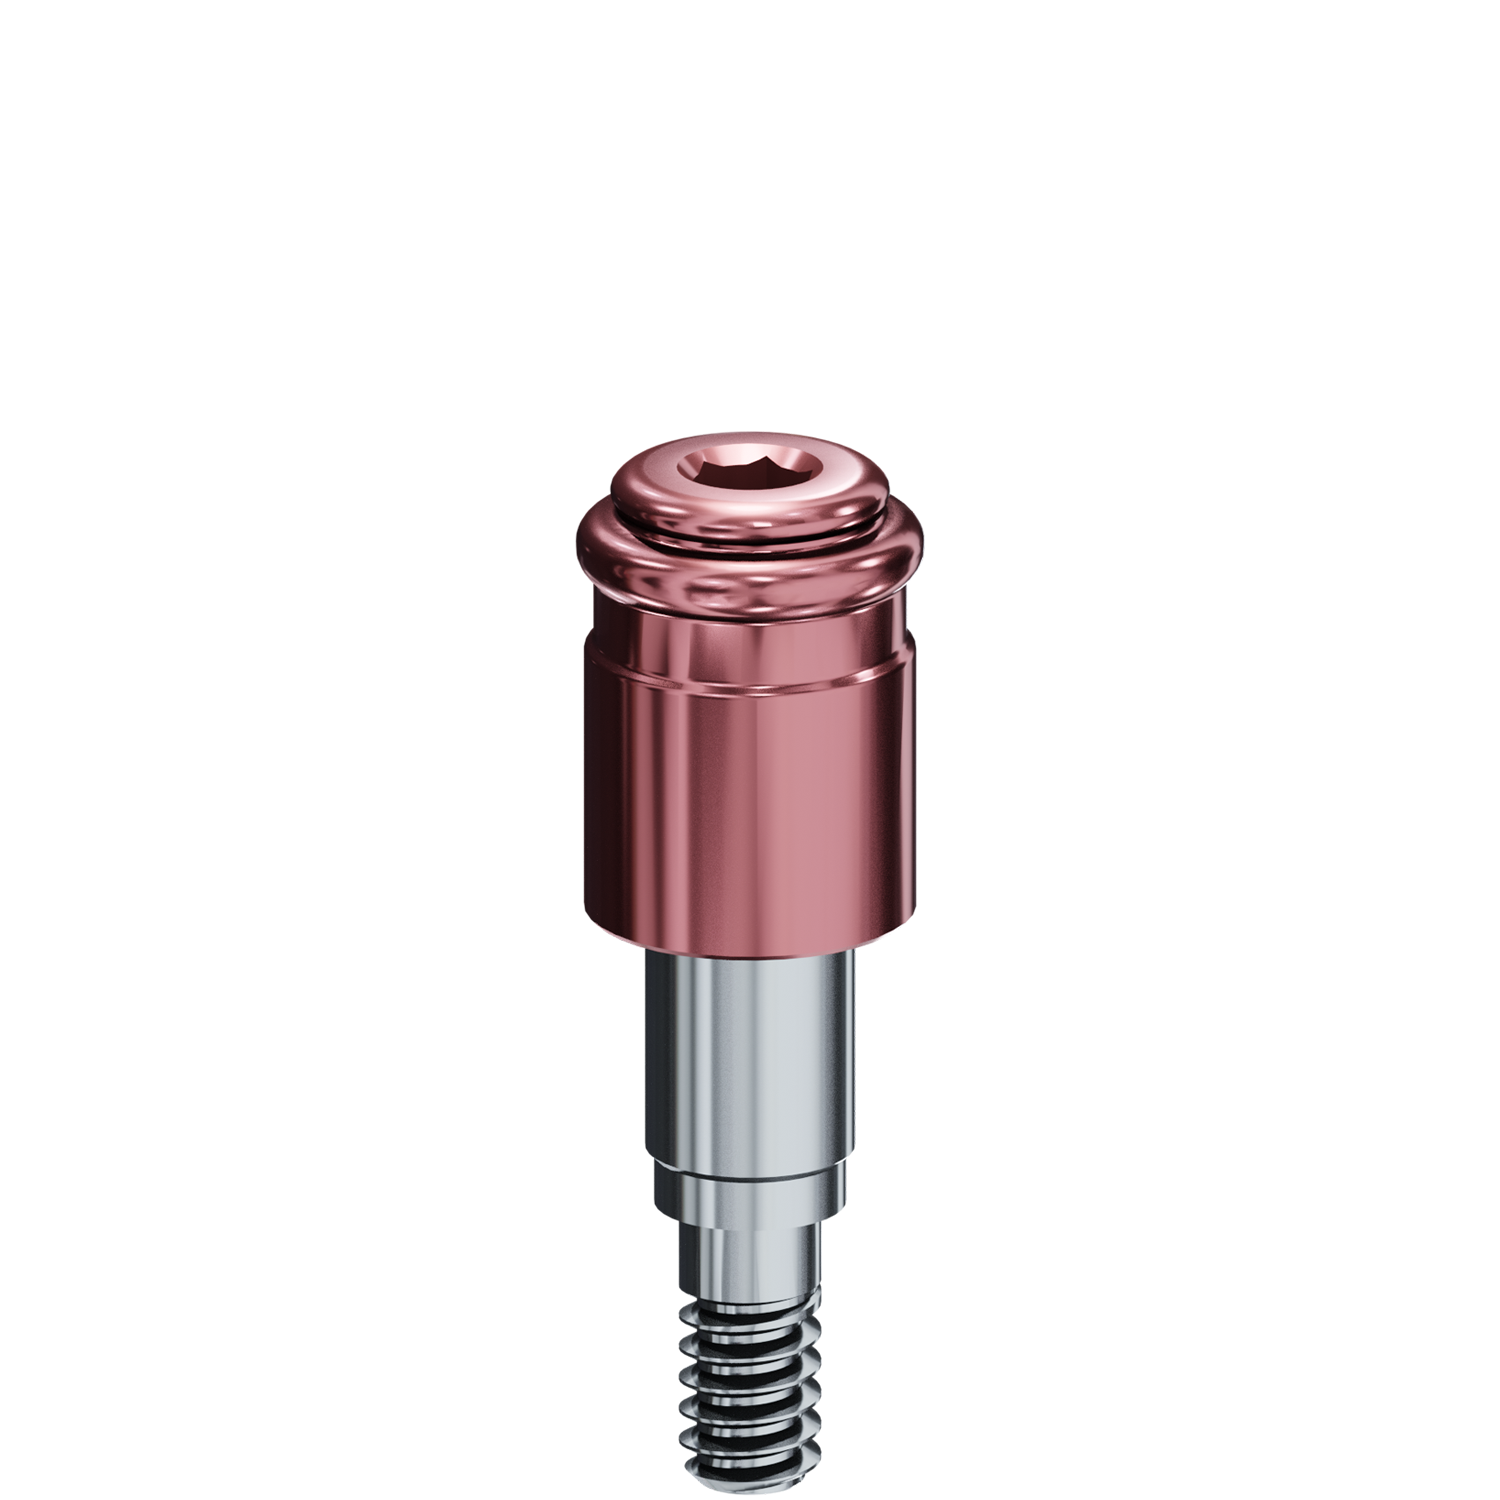 R-Tx Attachment System - 3.4mm Biomet 3i® Certain Connection - 048" Drive